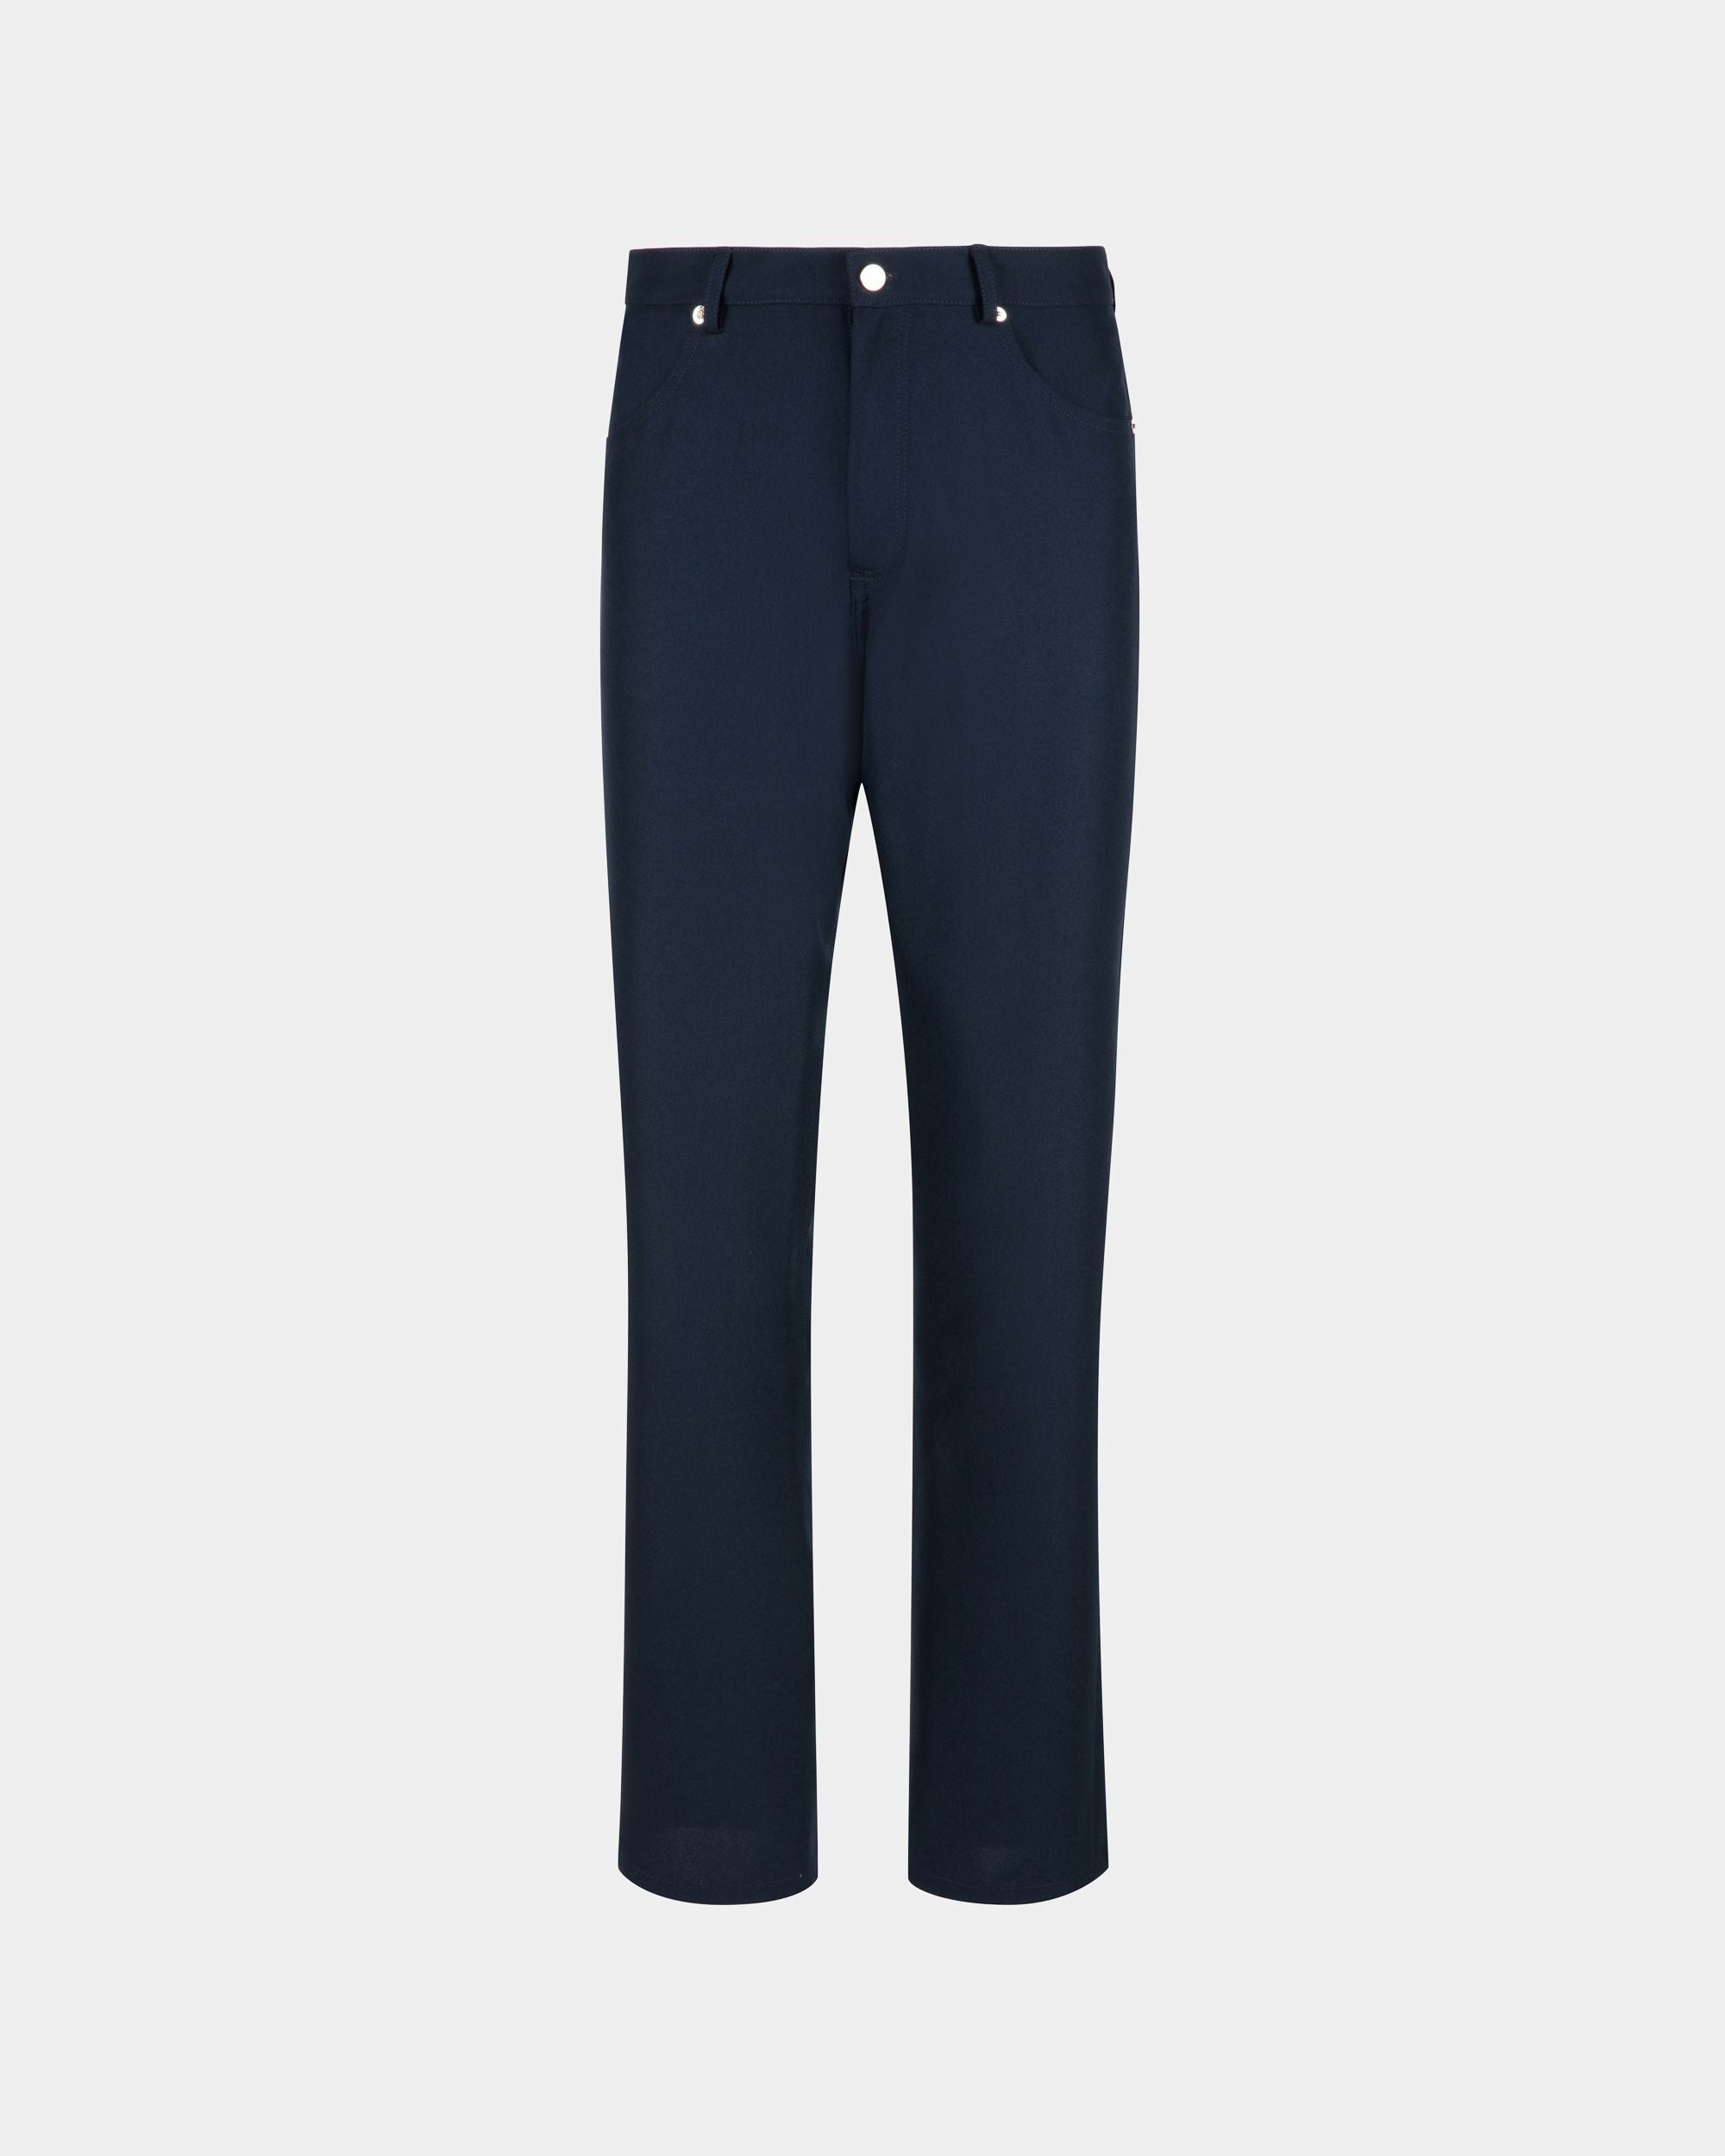 Men's Pants in Dark Blue in Synthetic Fabric | Bally | Still Life Front